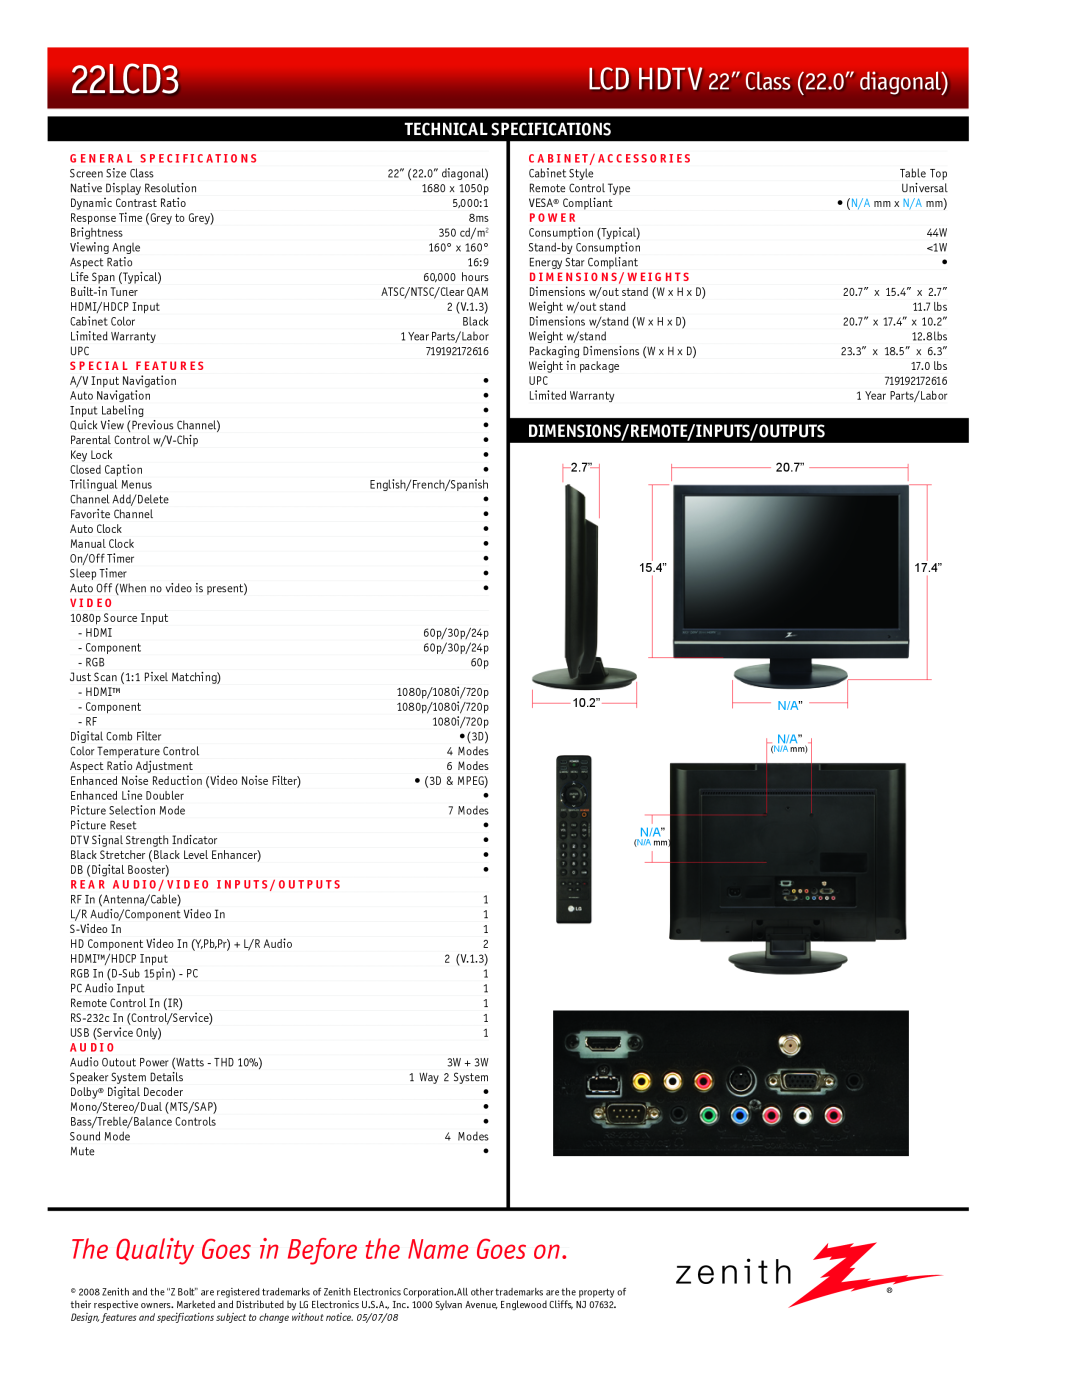 Zenith 22LCD3 Technical, Specifications, Dimensions/Remote/Inputs/Outputs, The Quality Goes in Before the Name Goes on 